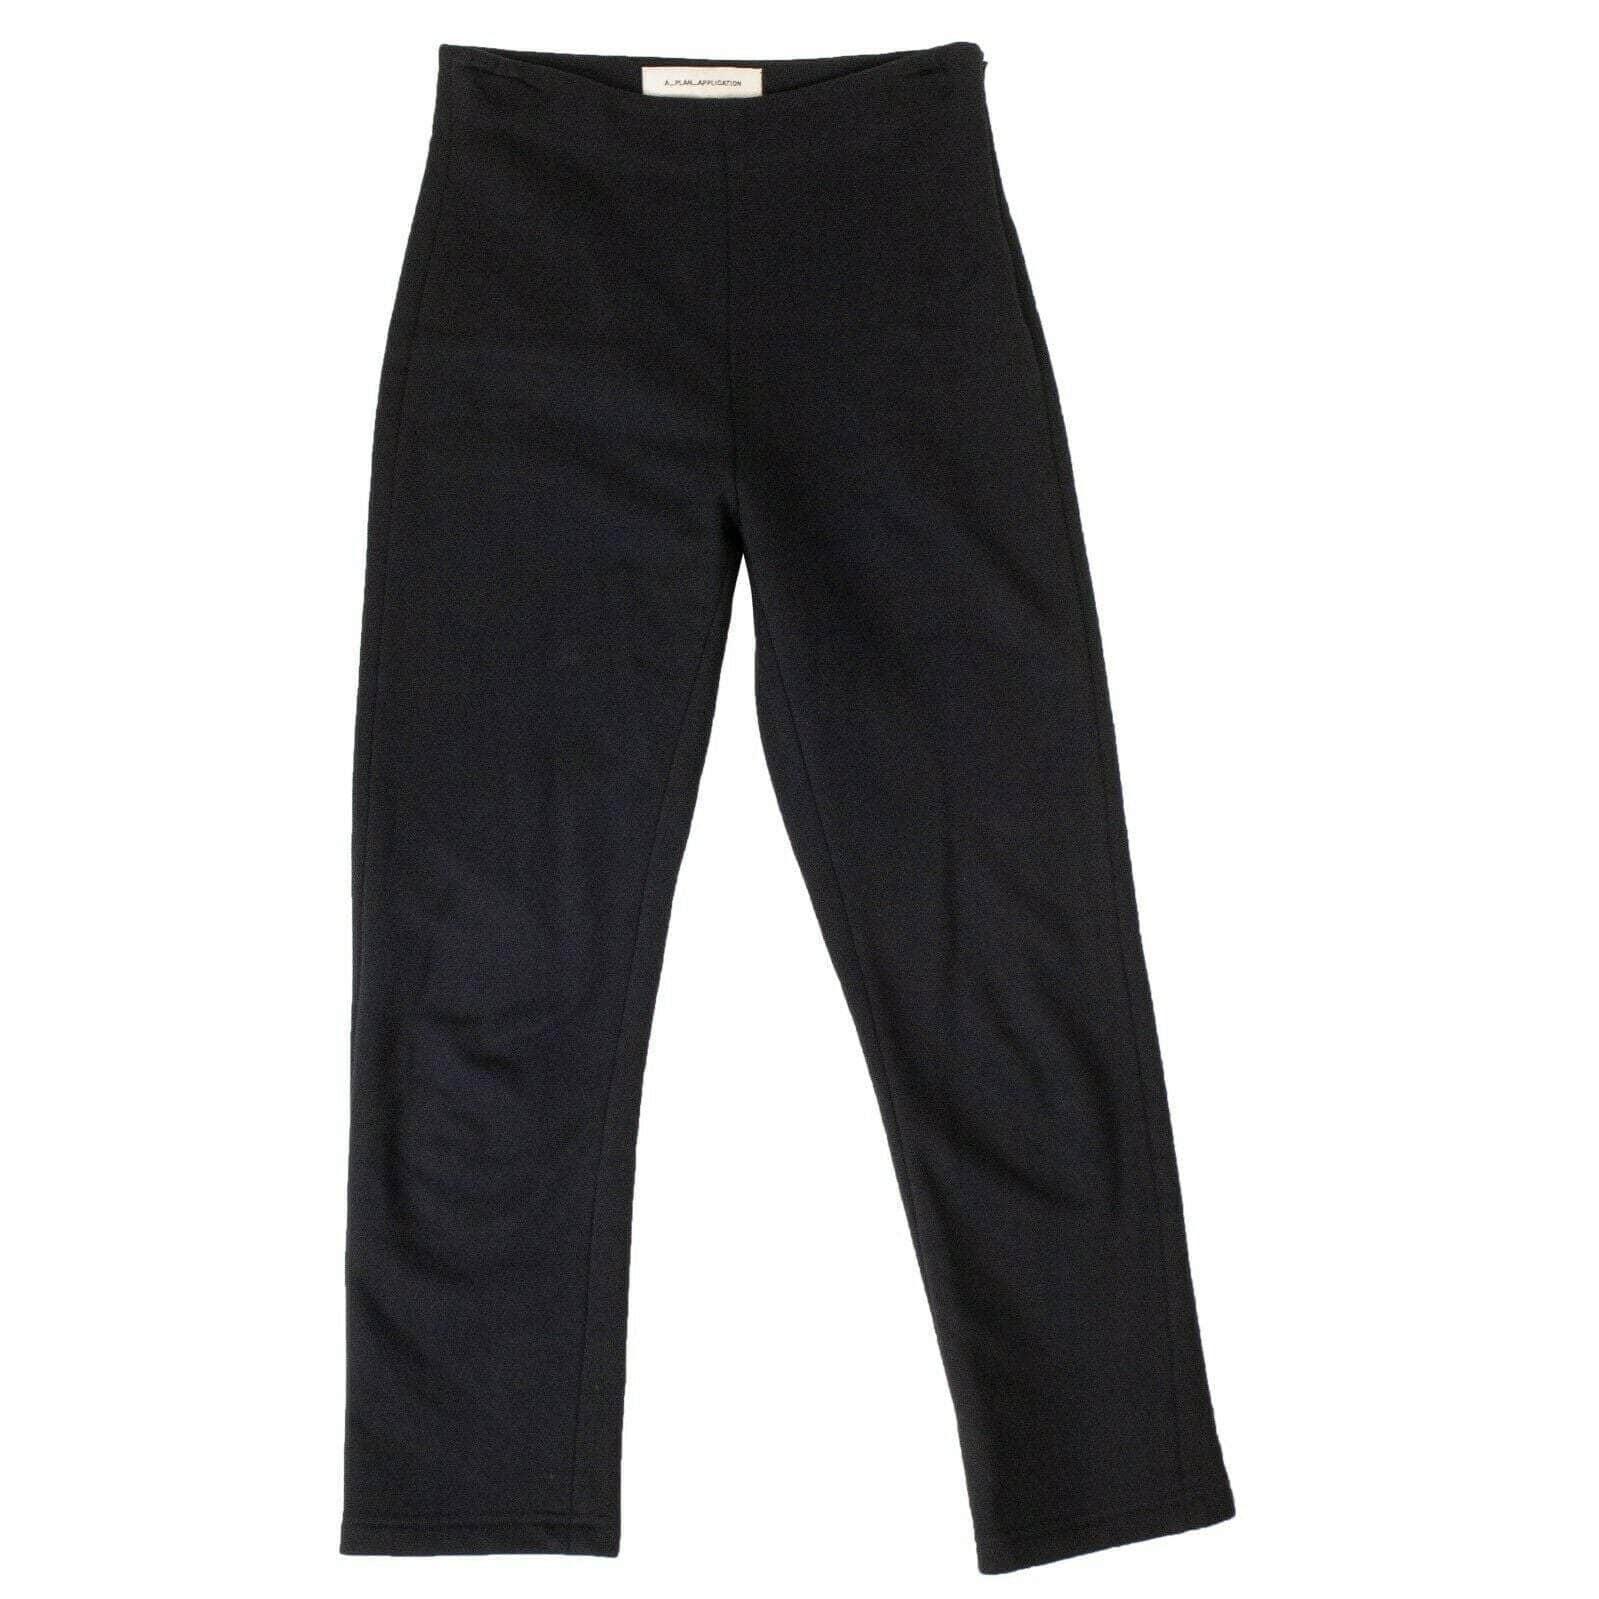 A_PLAN_APPLICATION a_plan_application, channelenable-all, couponcollection, gender-womens, main-clothing, size-s, under-250, womens-skinny-pants S Navy Blue Cropped Cigarette Pants 82NGG-AP-1017/S 82NGG-AP-1017/S